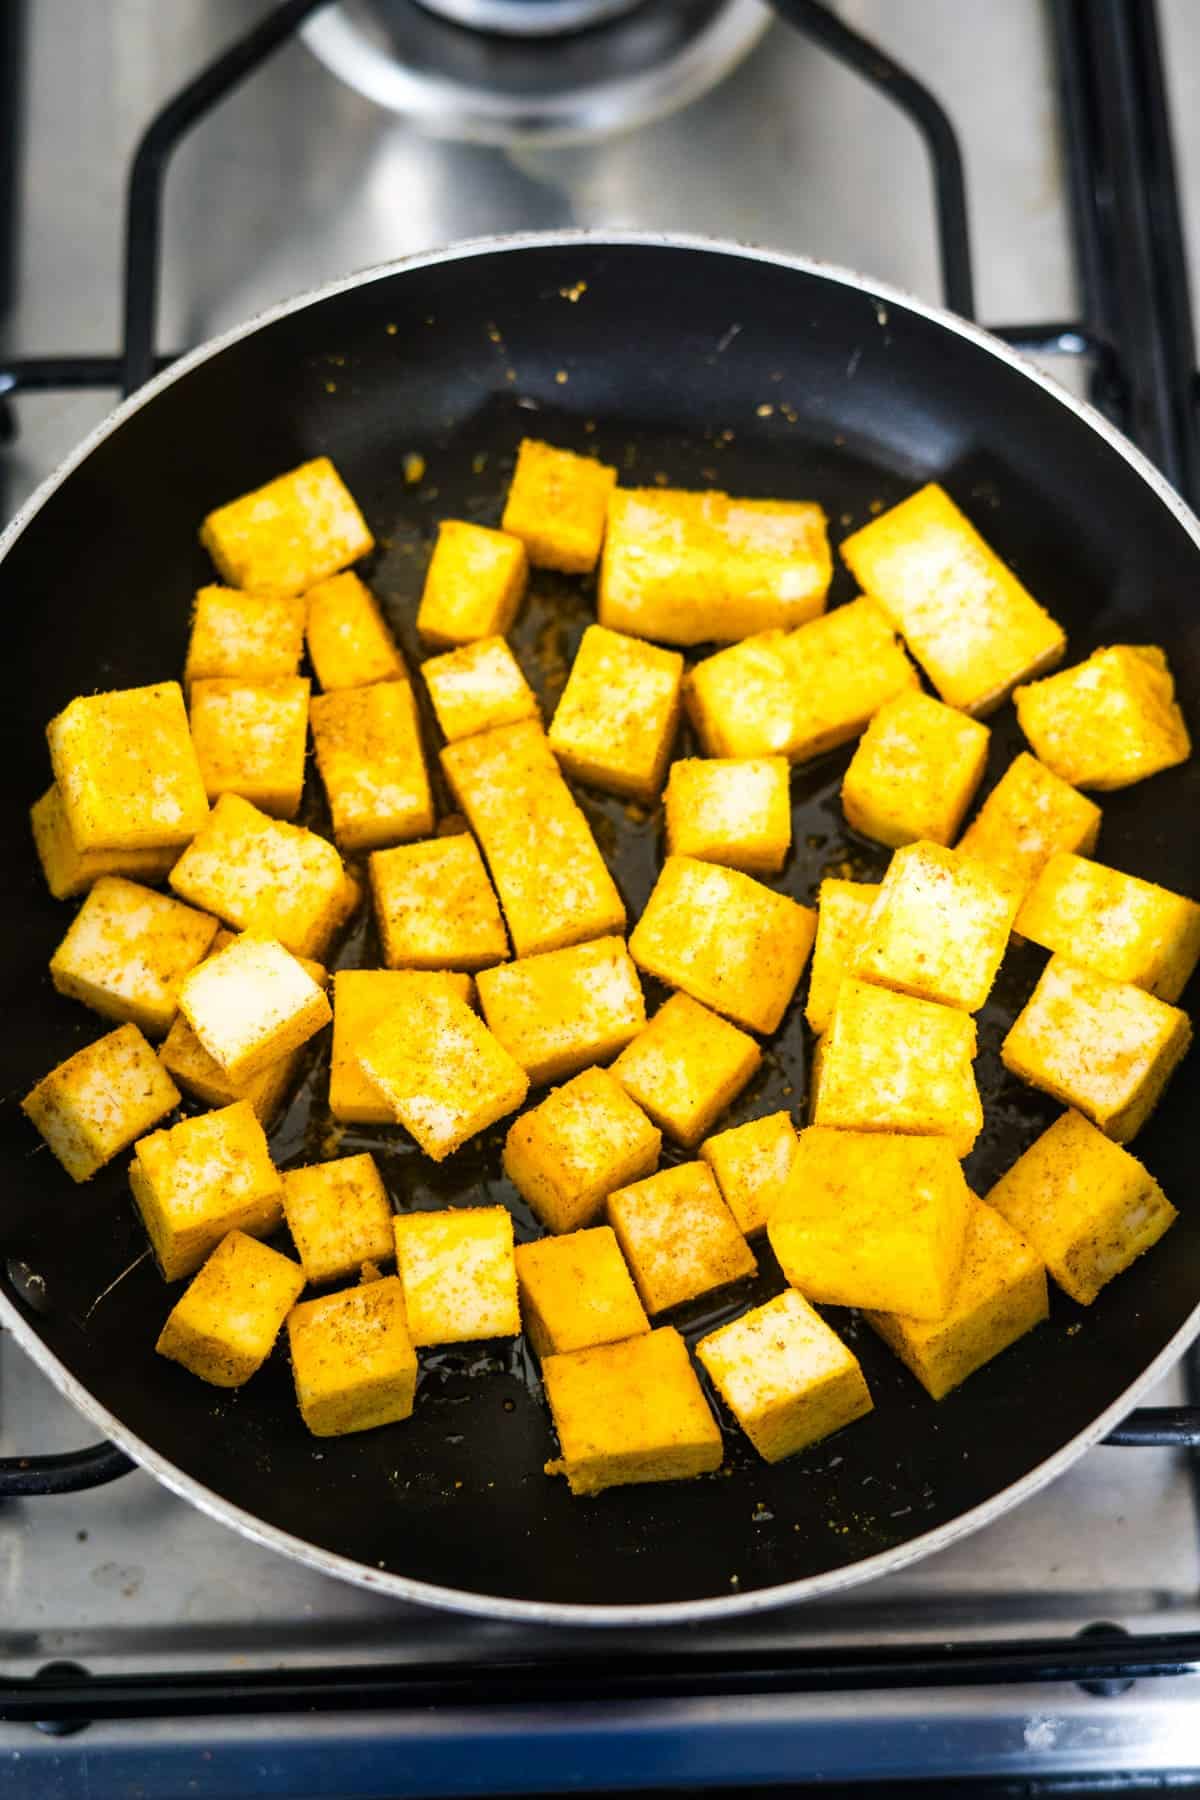 Fried tofu in a frying pan on a stove.